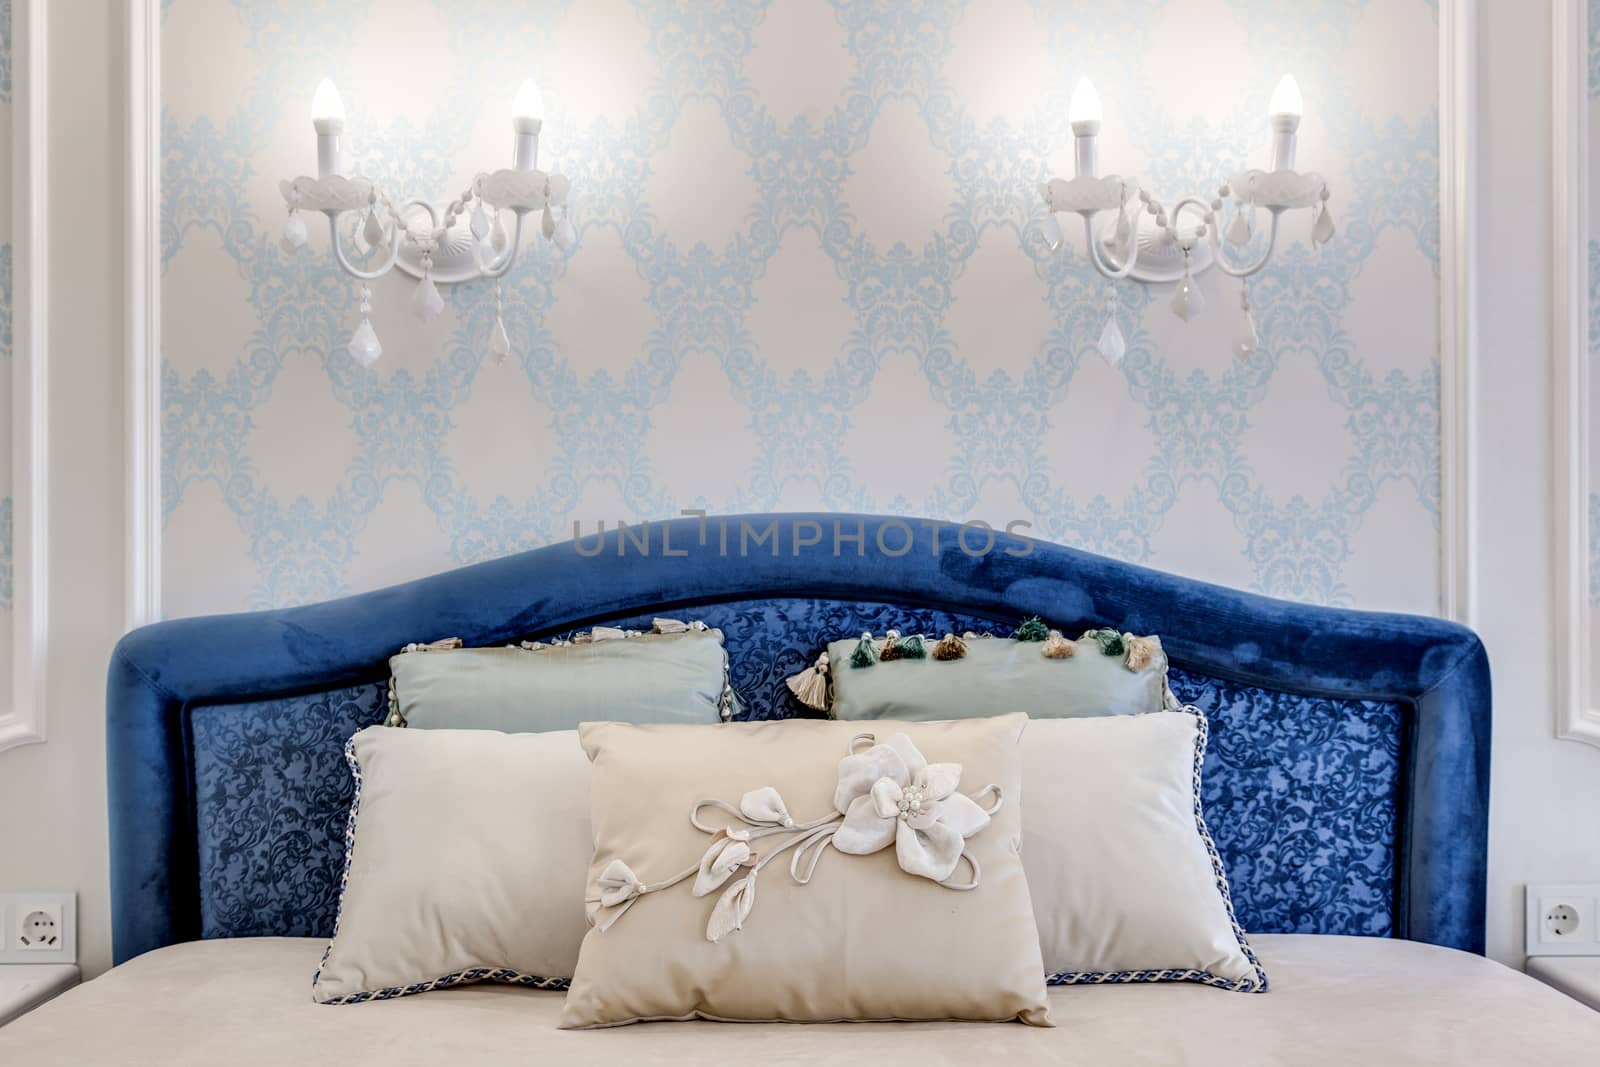 Headboard With decorative pillows and a candelabra over the bed